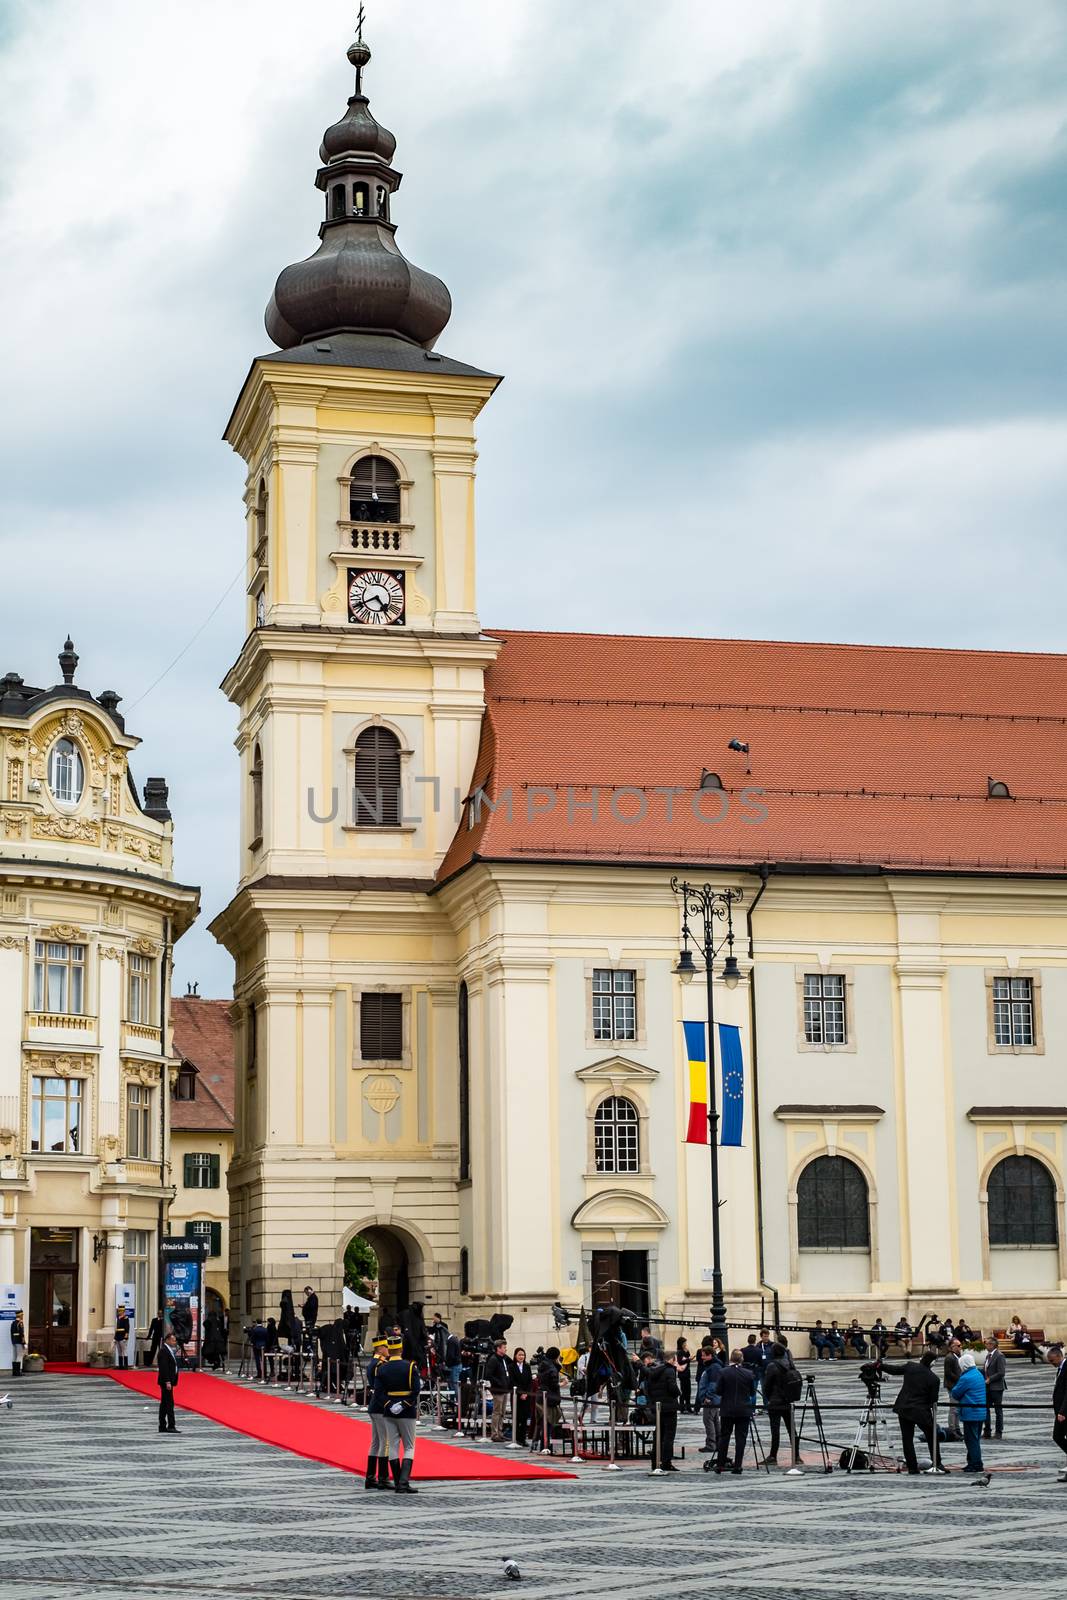 Sibiu City, Romania - 9 May 2019. Red carpet in the Big Square while waiting for the officials participants at the  Informal meeting of heads of state or government 2019 in Big Square  Sibiu, Romania